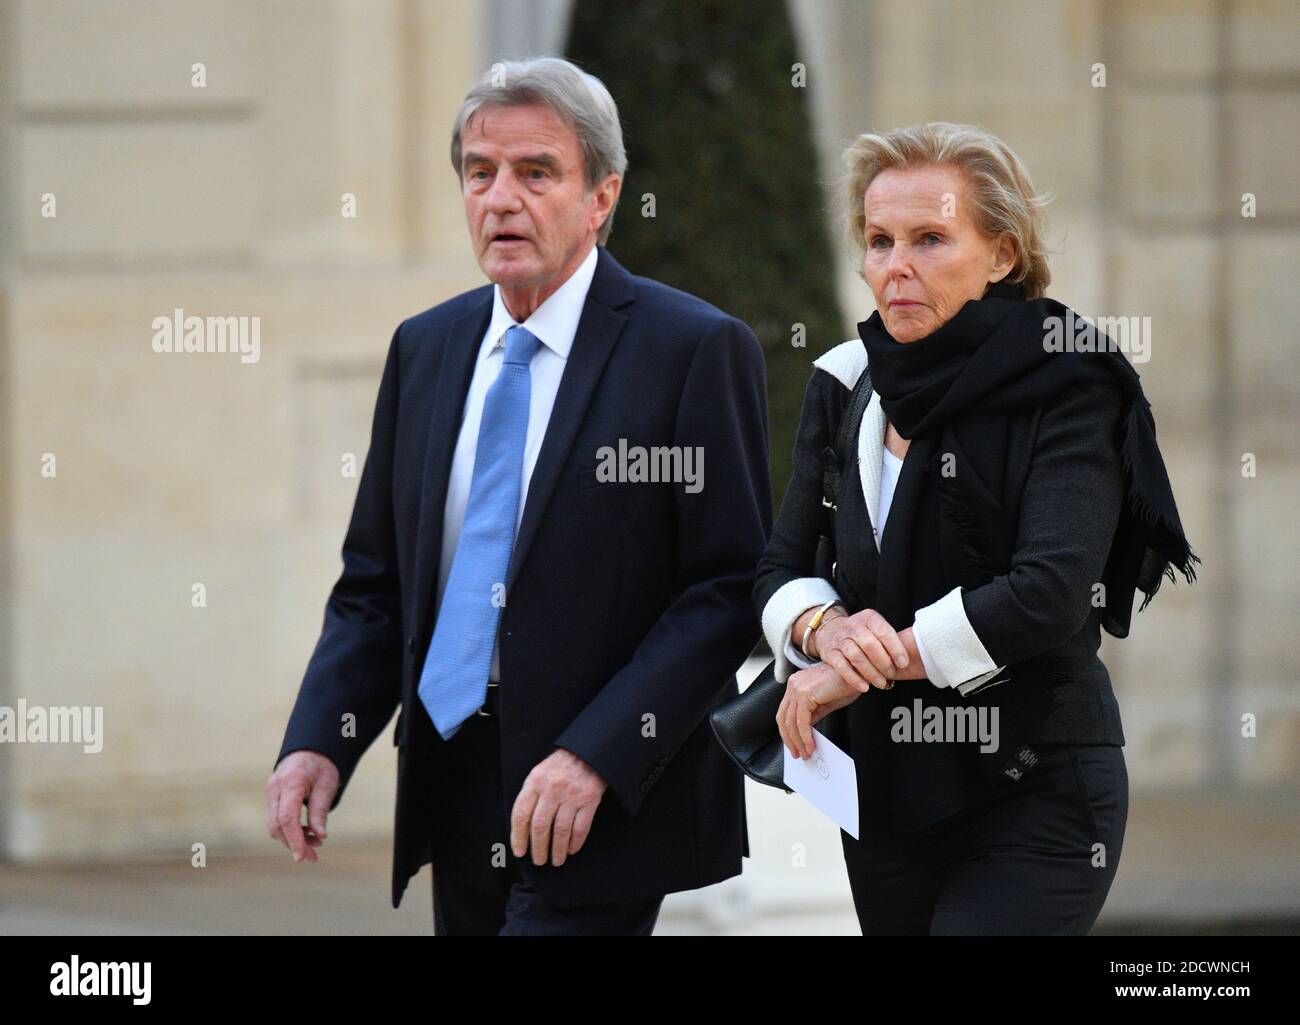 Bernard Kouchner and wife Christine Ockrent arrive for an official dinner at The Elysee Palace in Paris on April 10, 2018, part of the visit of Saudi Arabia's Crown Prince Mohammed bin Salman to France. Photo by Christian Liewig/ABACAPRESS.COM Stock Photo